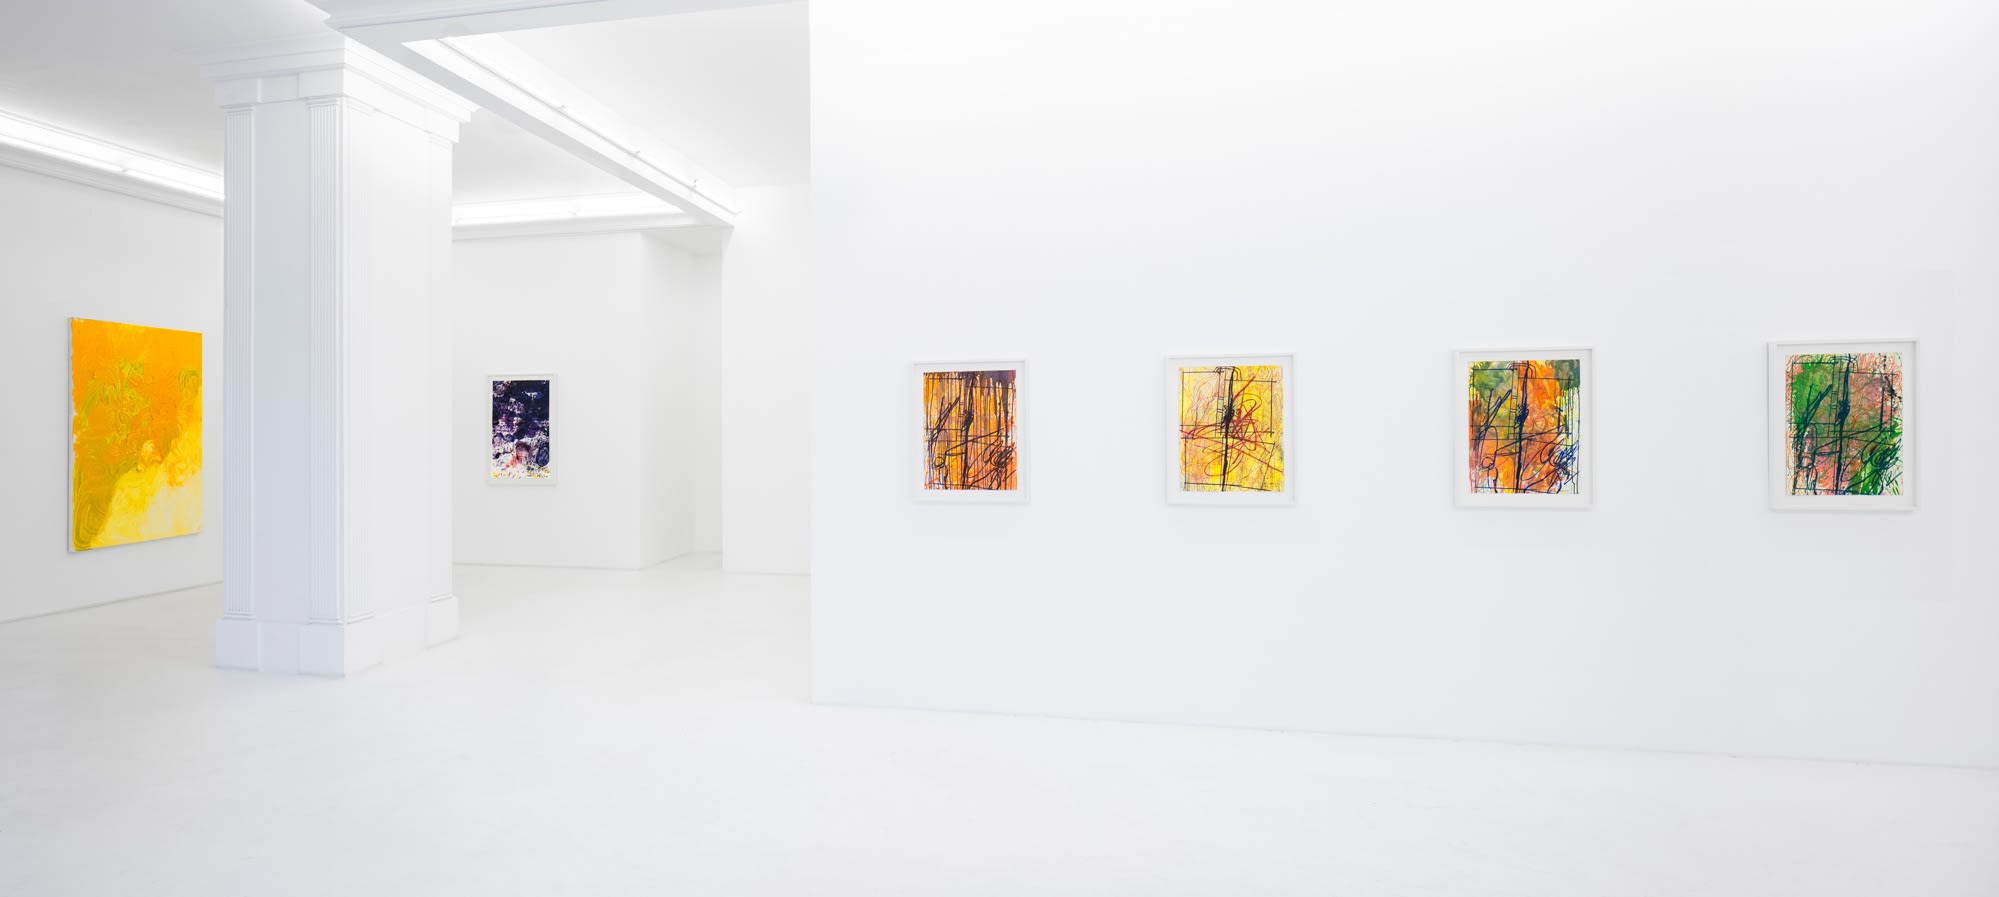 Hermann Nitsch Installation View January 14 – February 11, 2022 Peres Projects, Berlin Photographed by: Timo Ohler